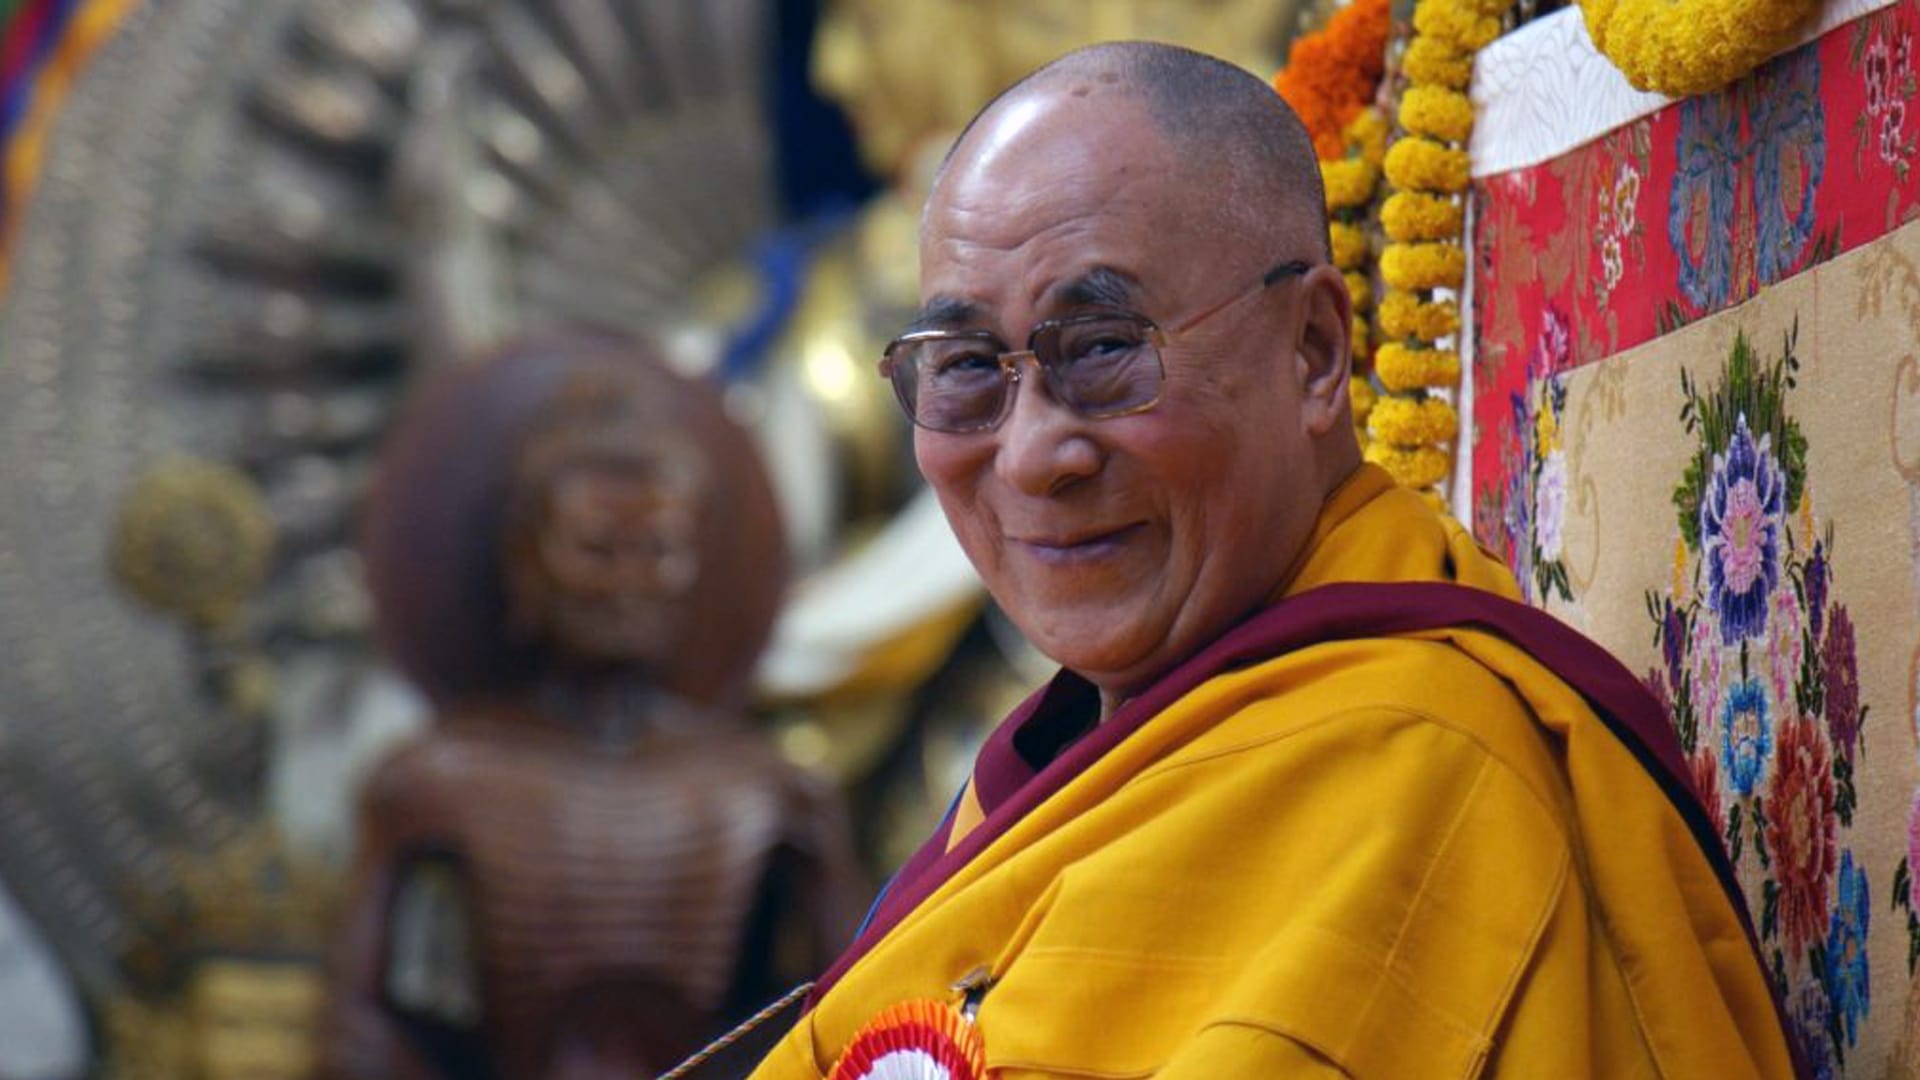 Compassion in Exile: The Story of the 14th Dalai Lama